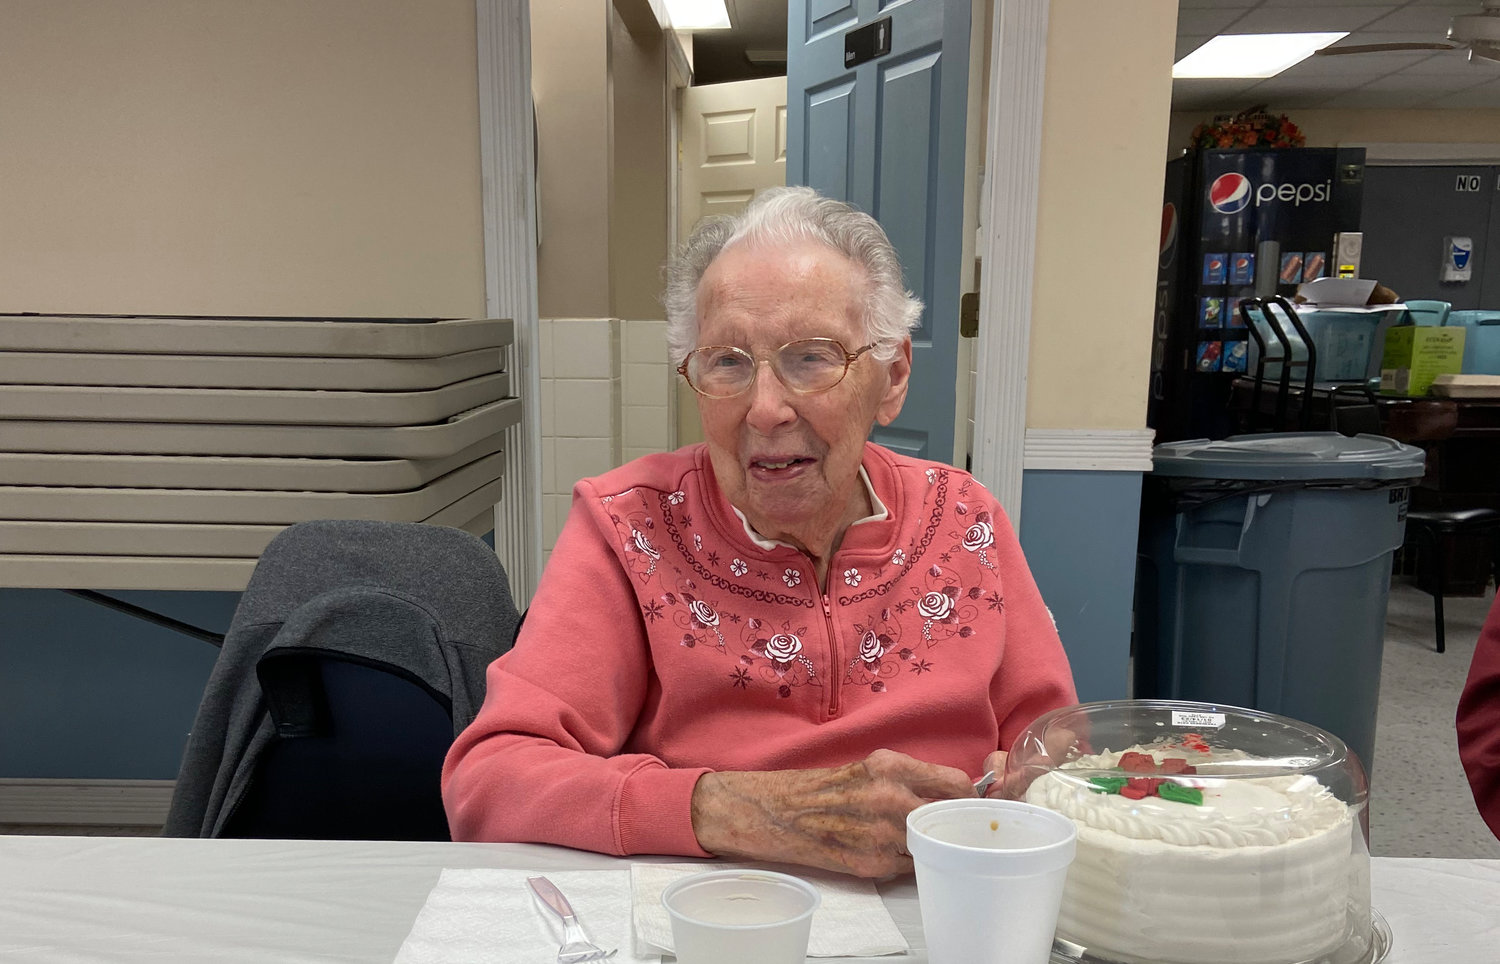 Marion Poppleton, of Verona, visits New London Fire Department for her 101st birthday on Friday.